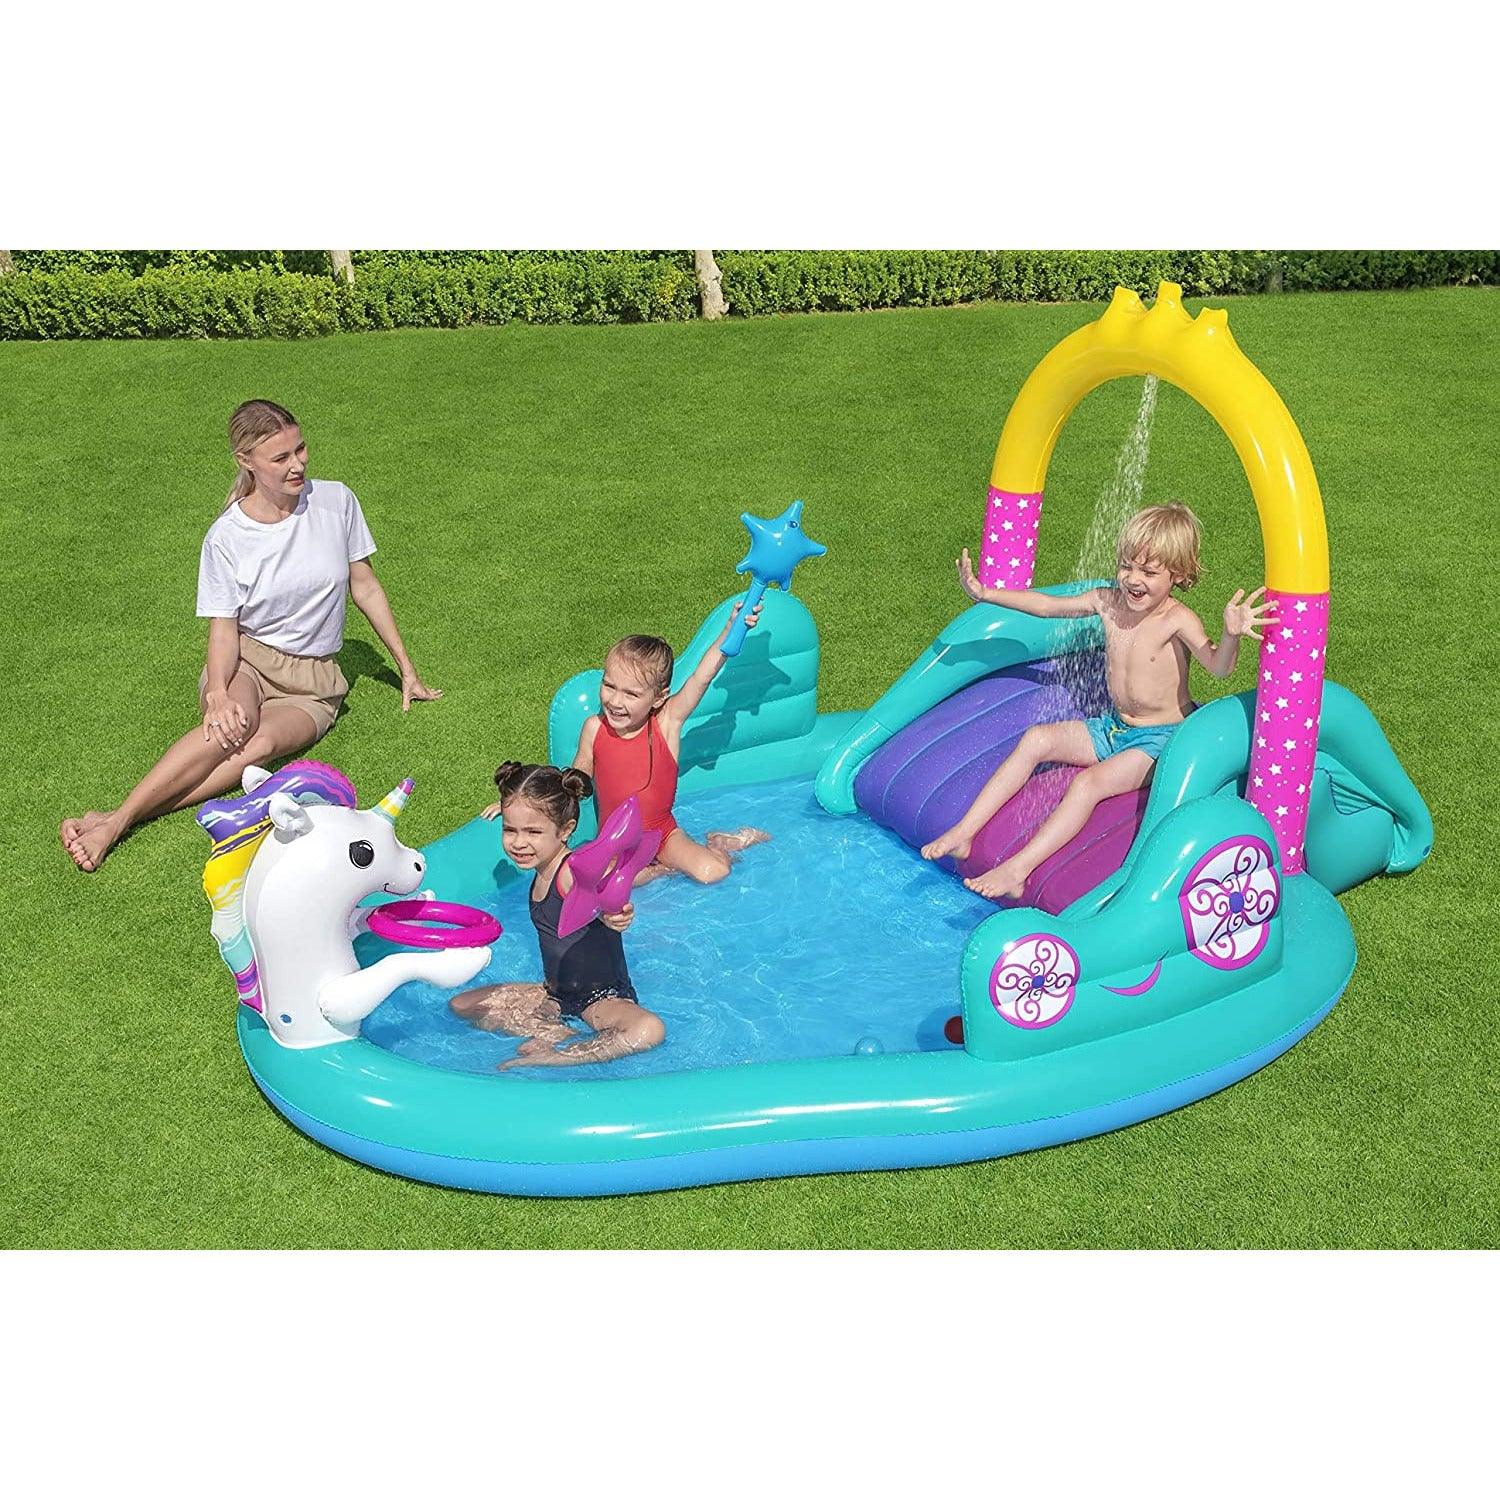 Bestway 53097 Inflatable Play Center with Inflatable Unicorn